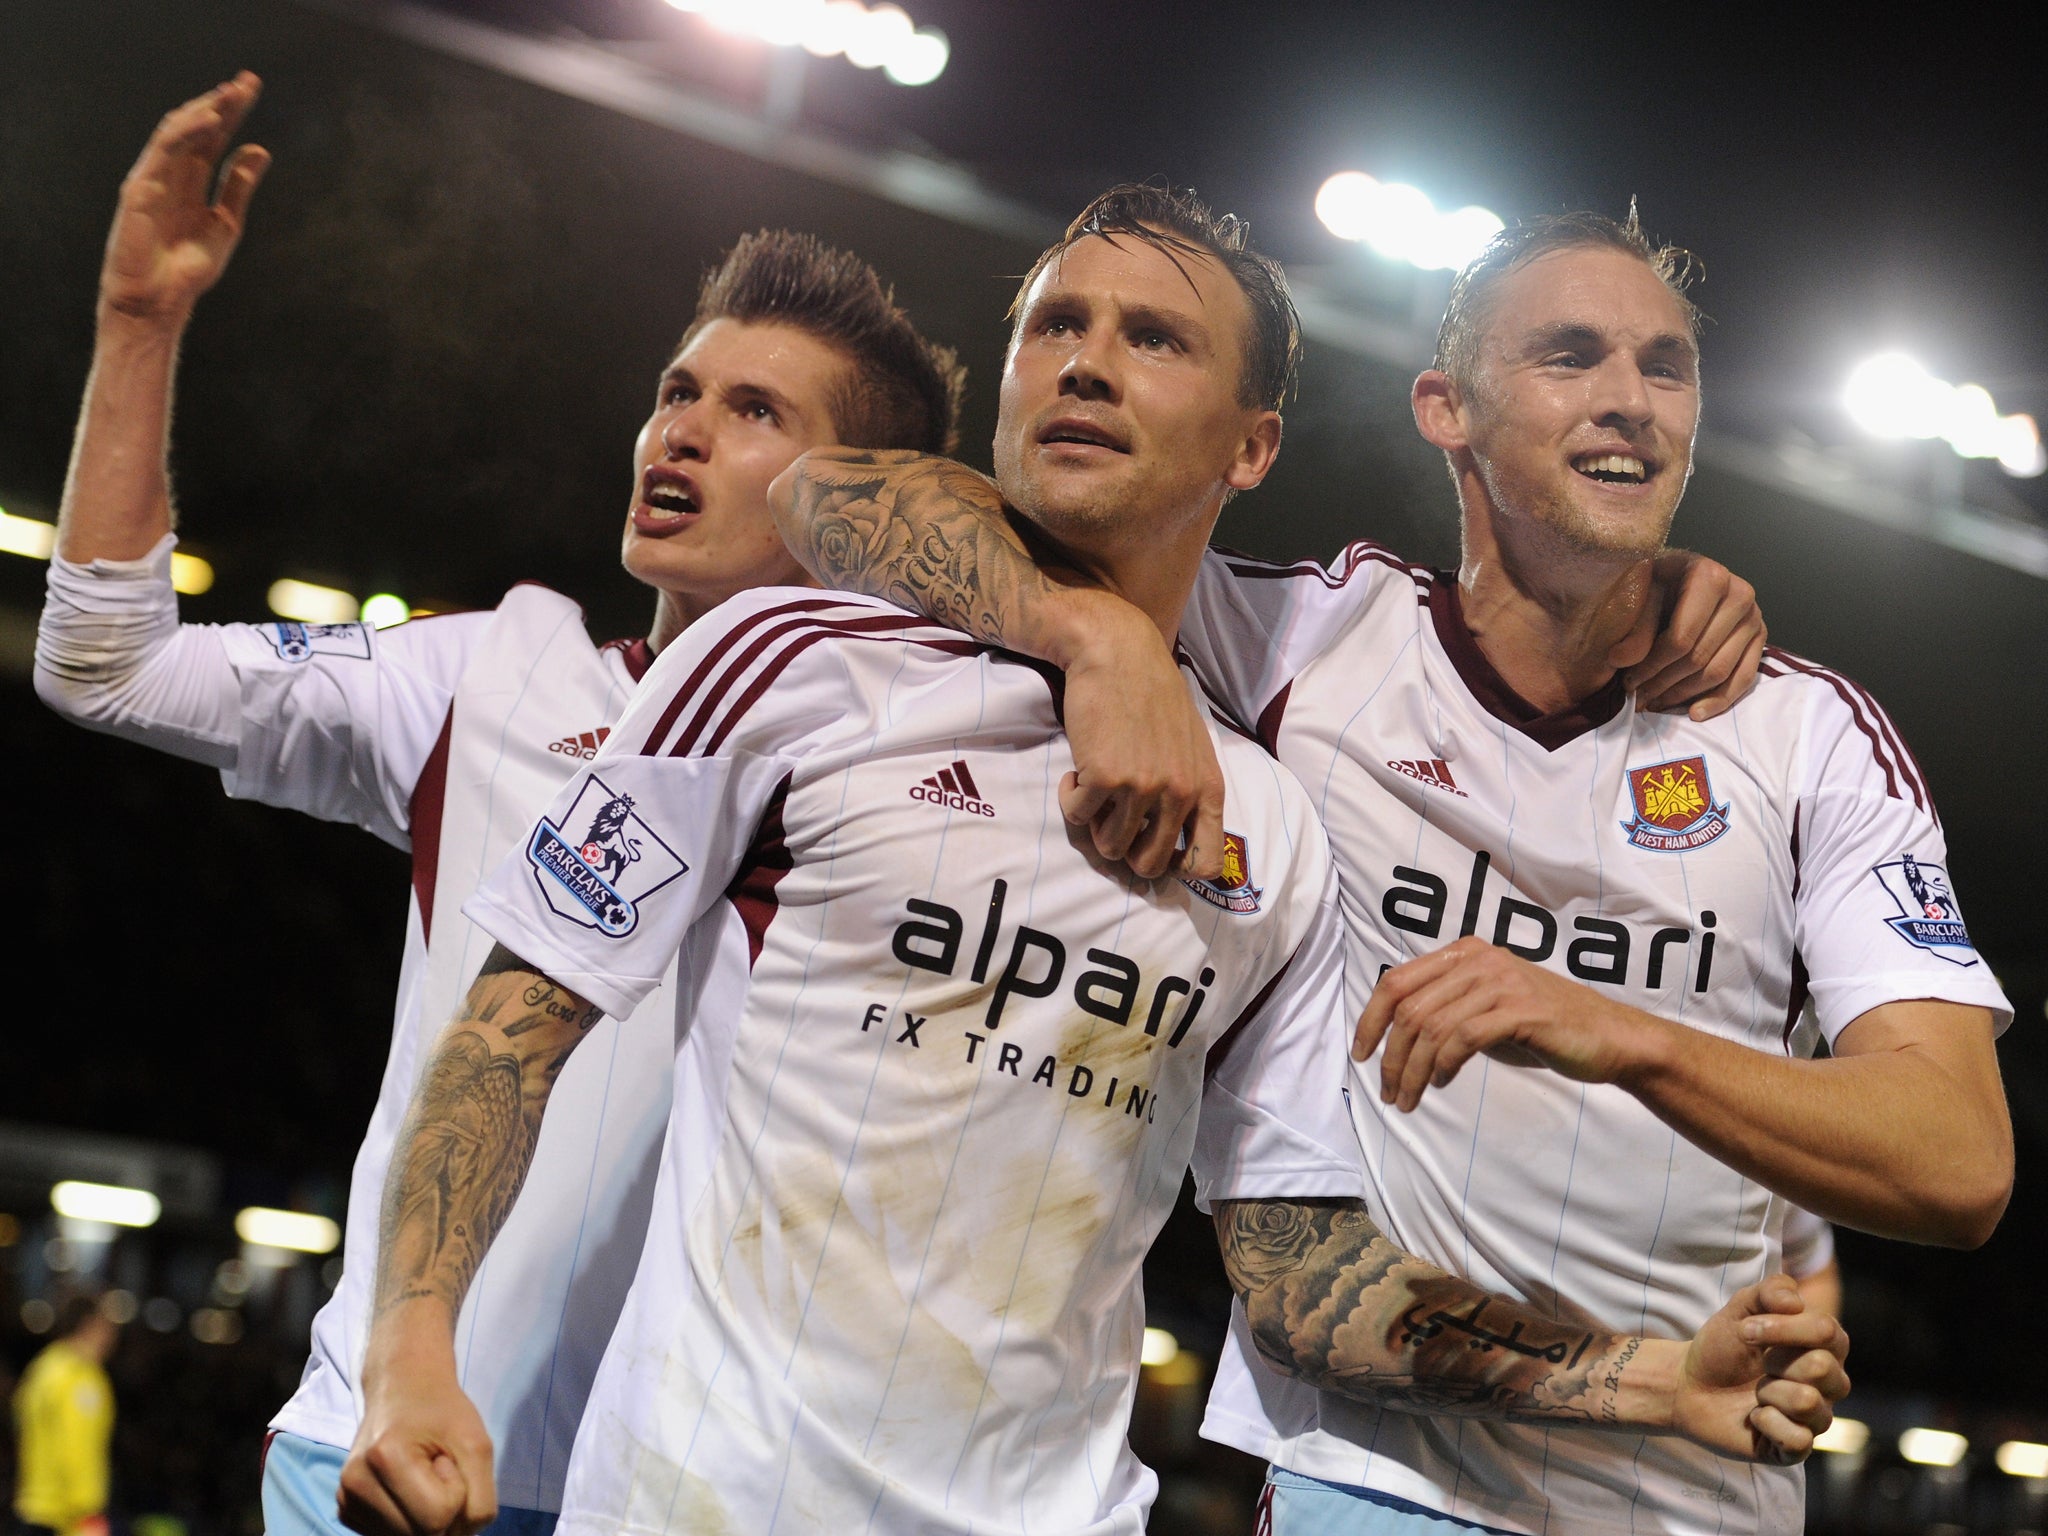 West Ham players Daniel Potts (L), Matt Taylor (C) and Jack Collison (R) celebrate after they take the lead against Burnley